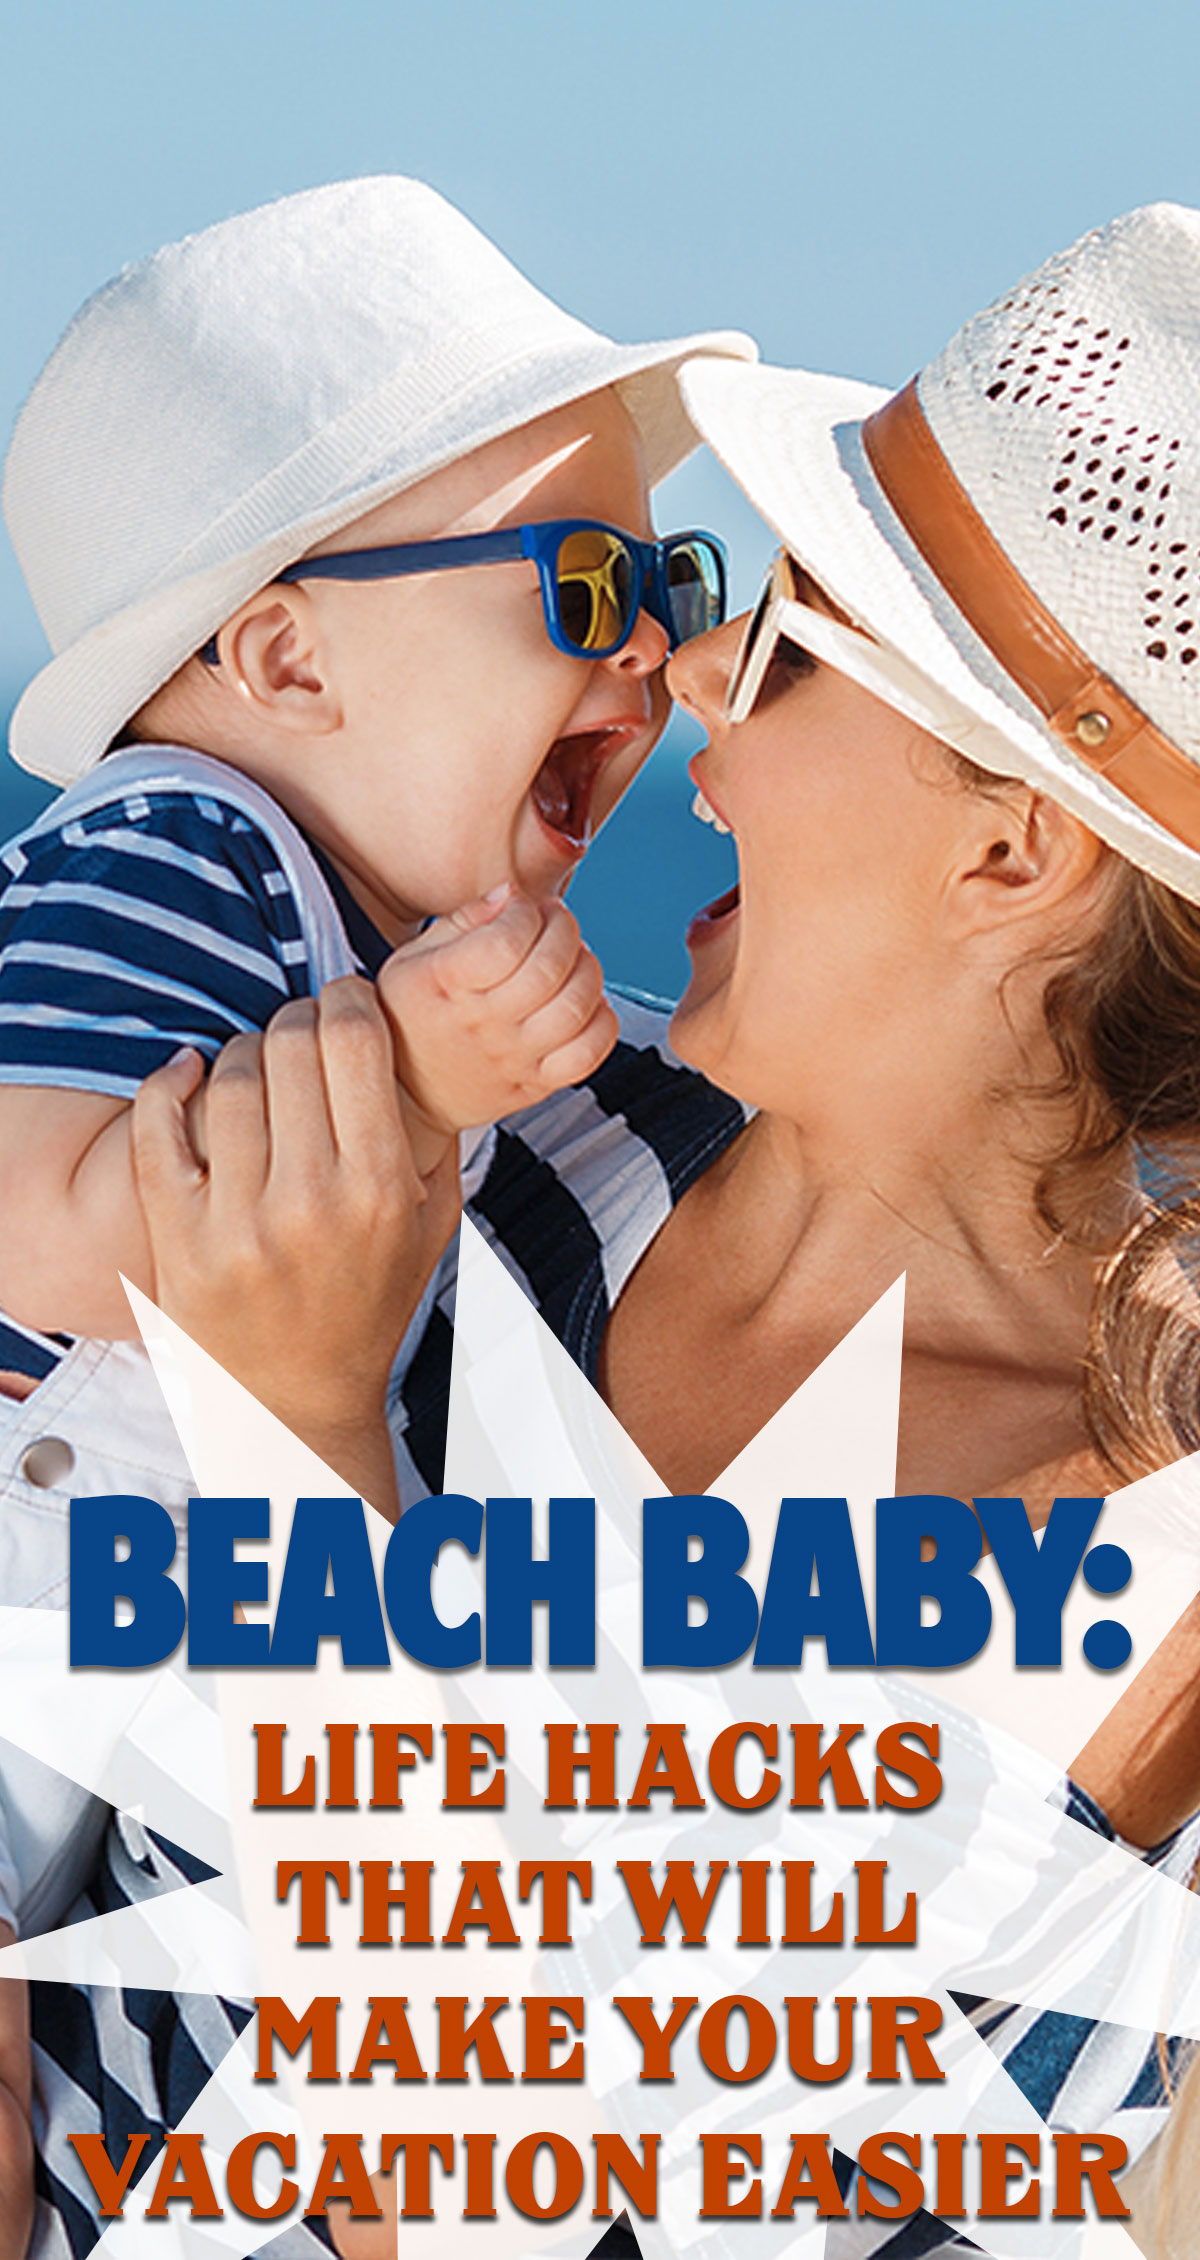  PBeach Baby: Life Hacks That Will Make Your Vacation Easier Pin